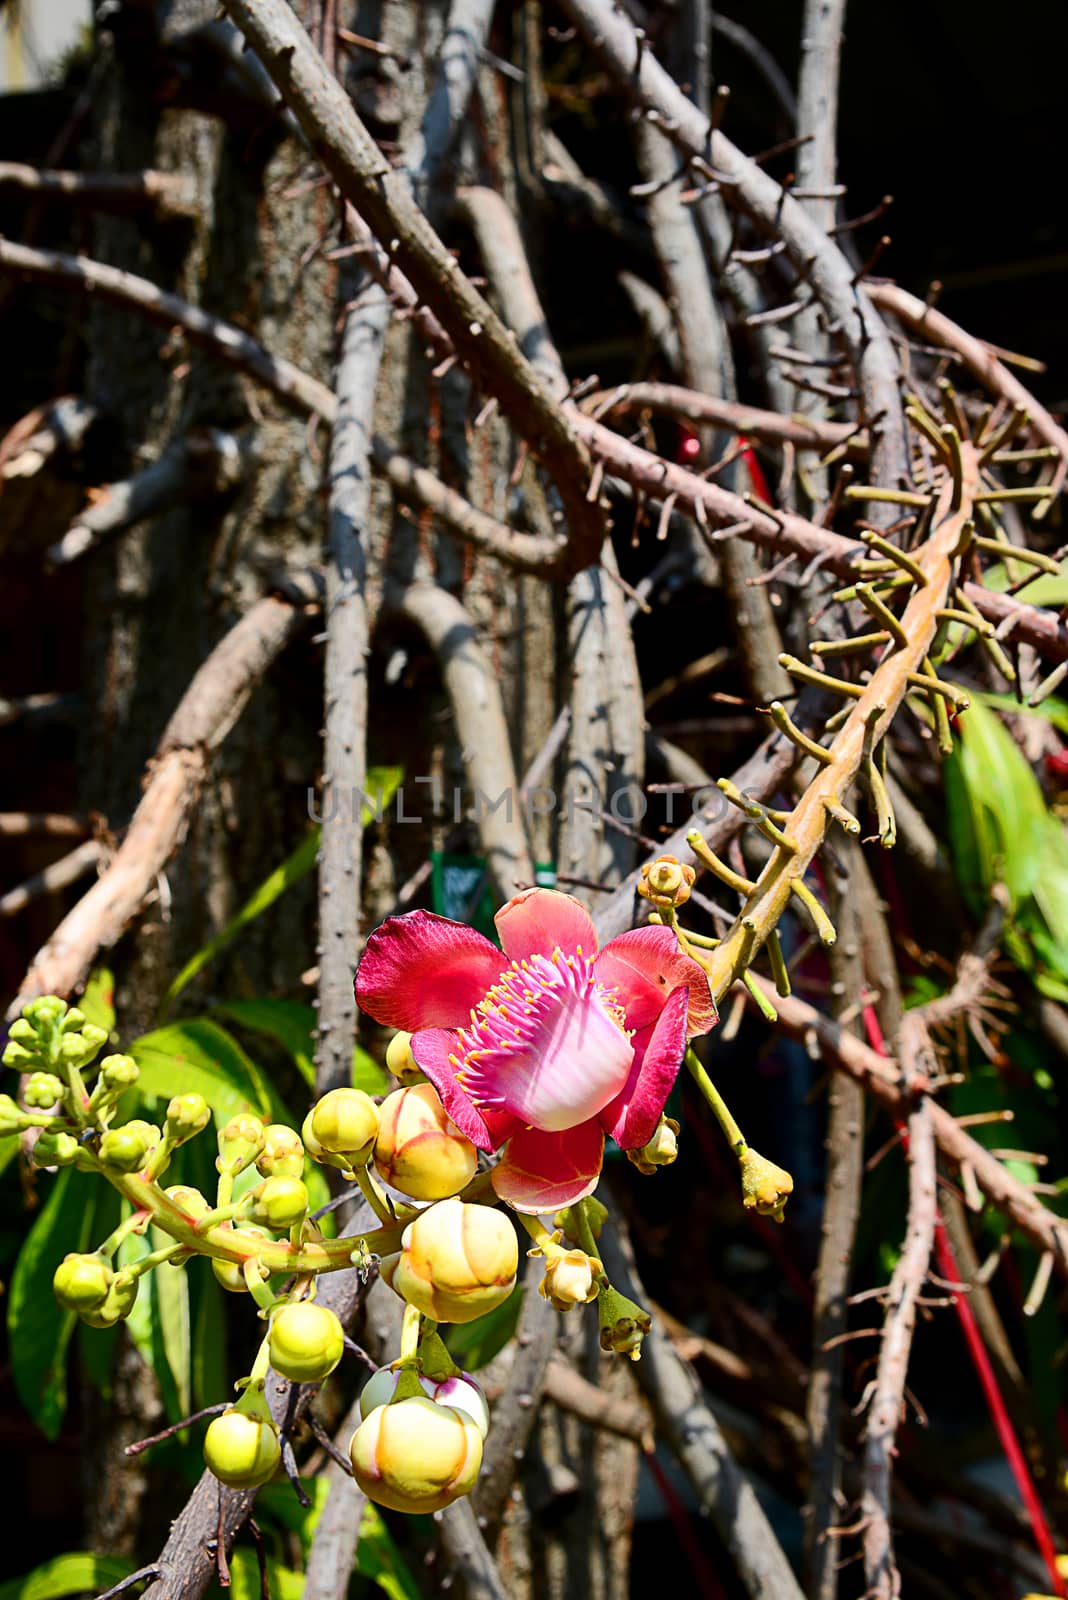 The Cannonball Tree Flower and branch by AekPN